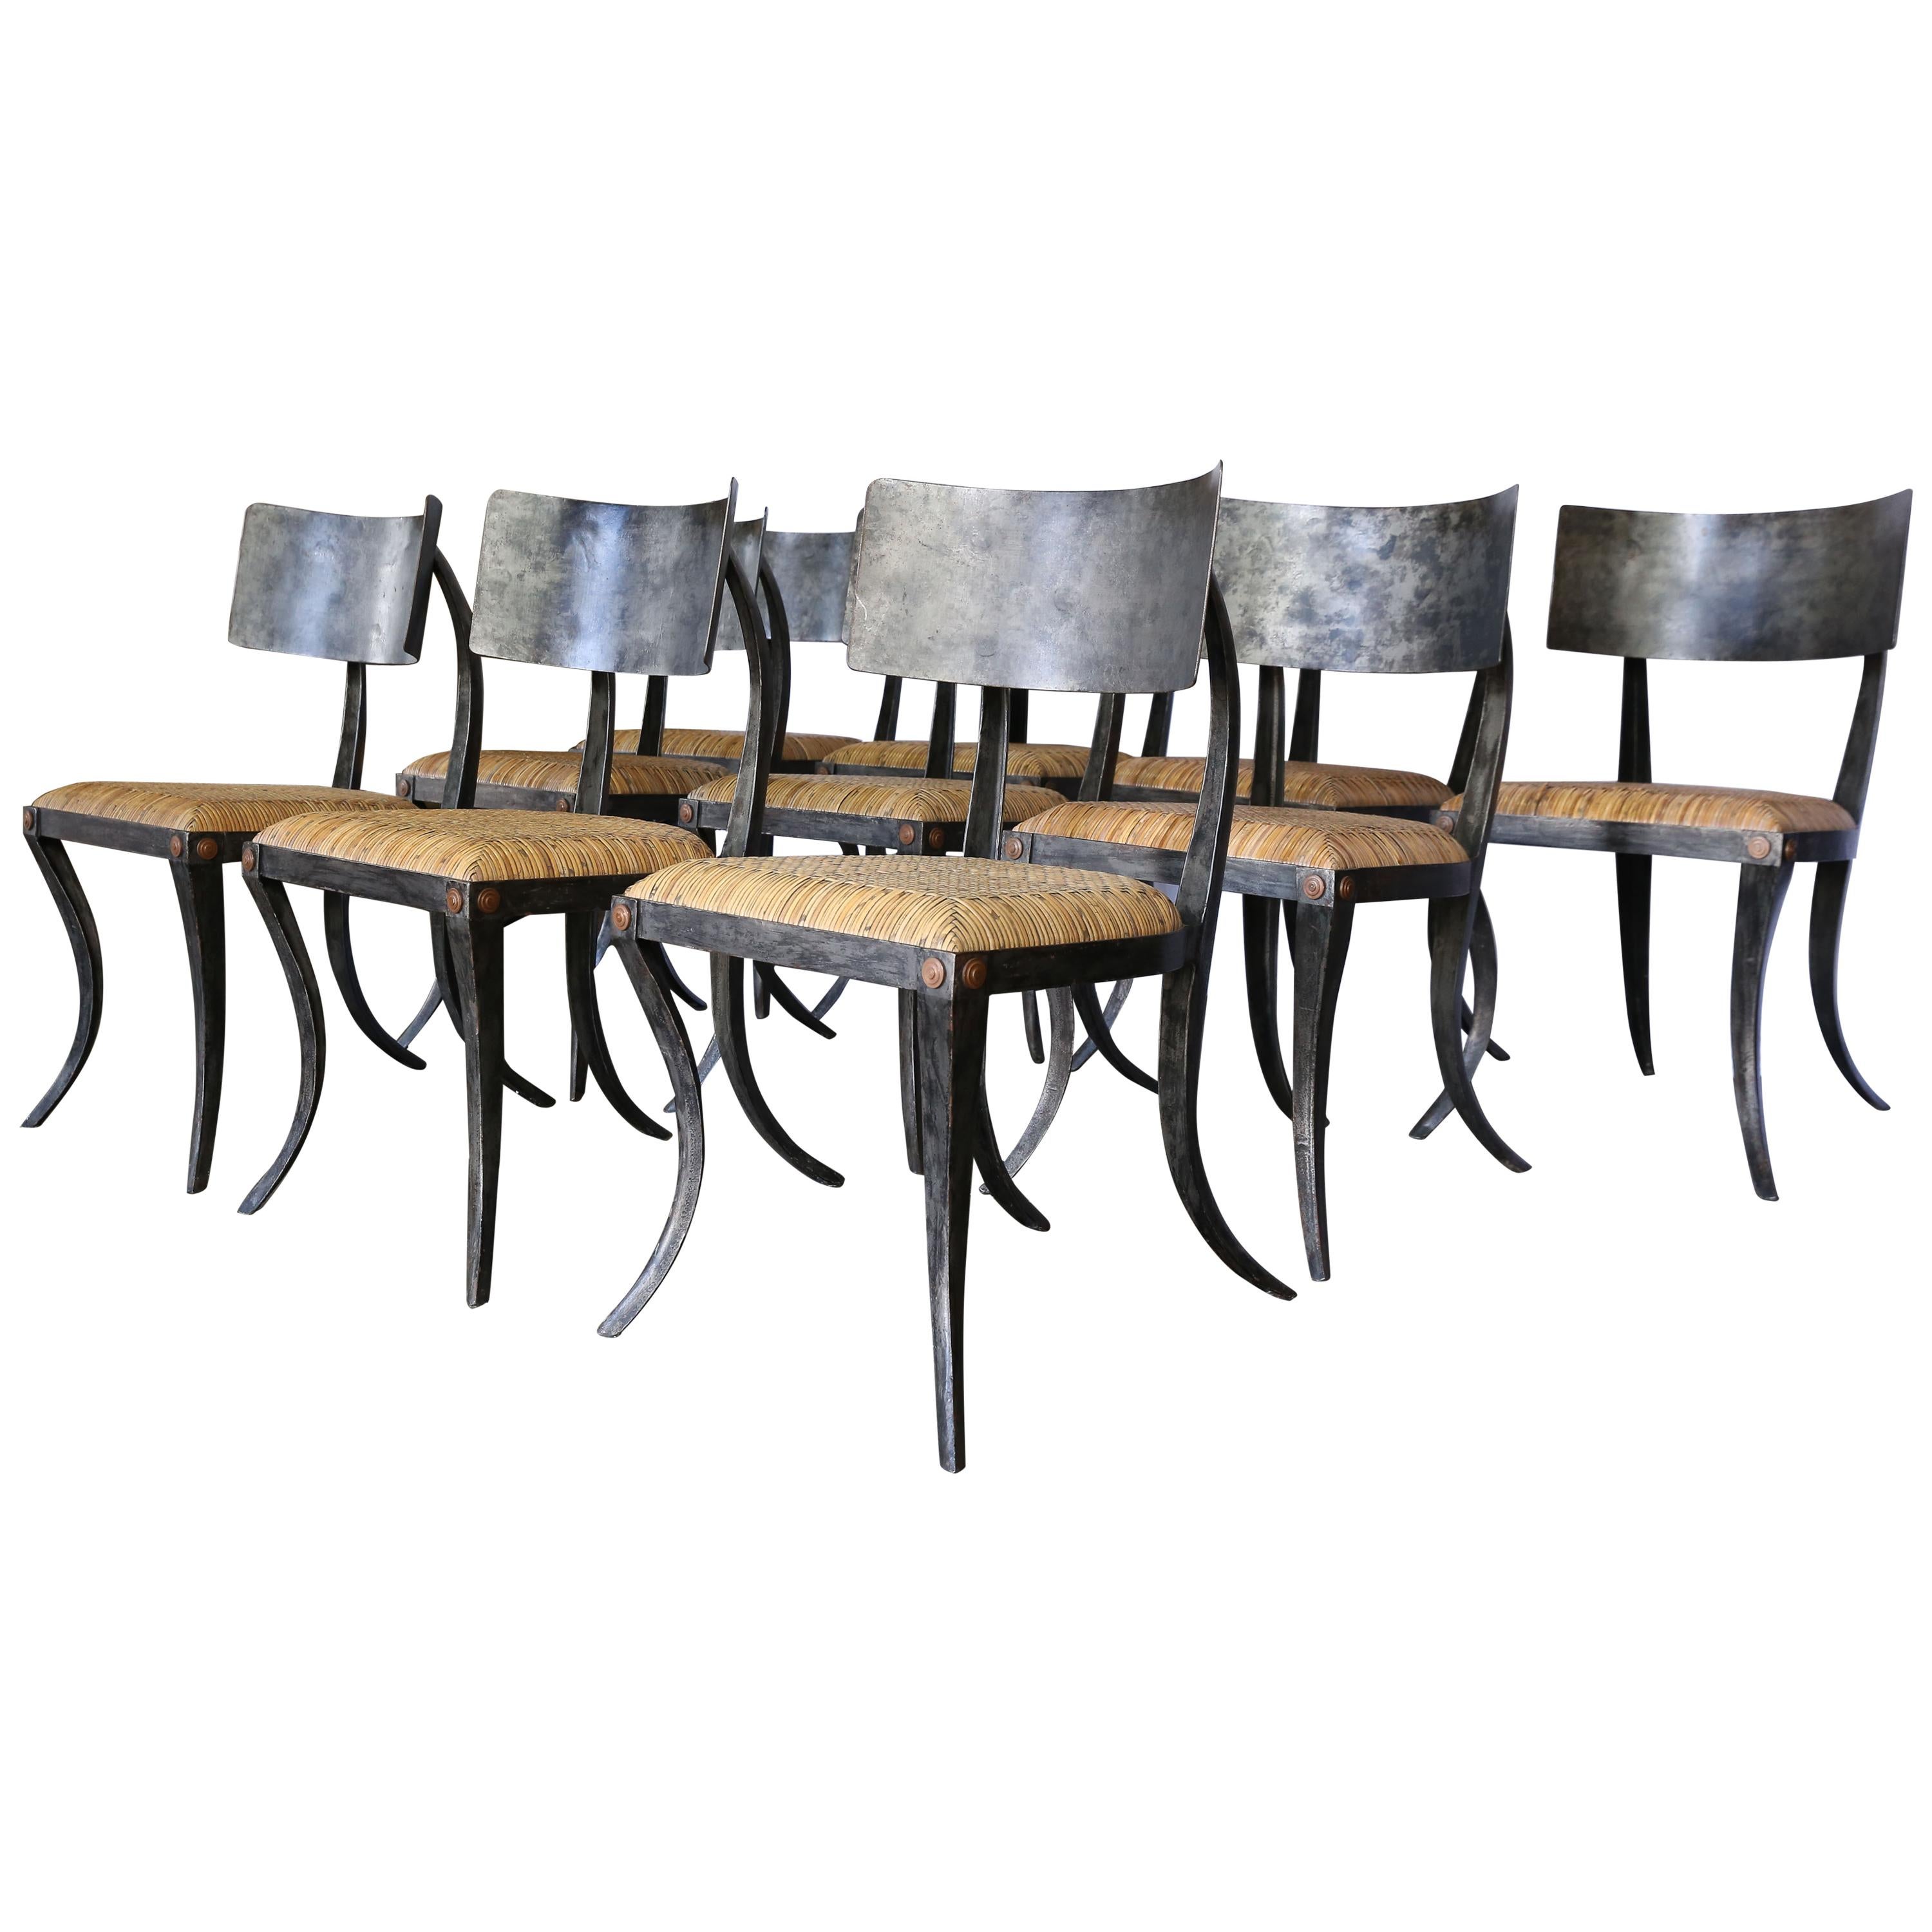 Set of 10 Metal Klismos Chairs by Ched Berenguer-Topacio For Sale